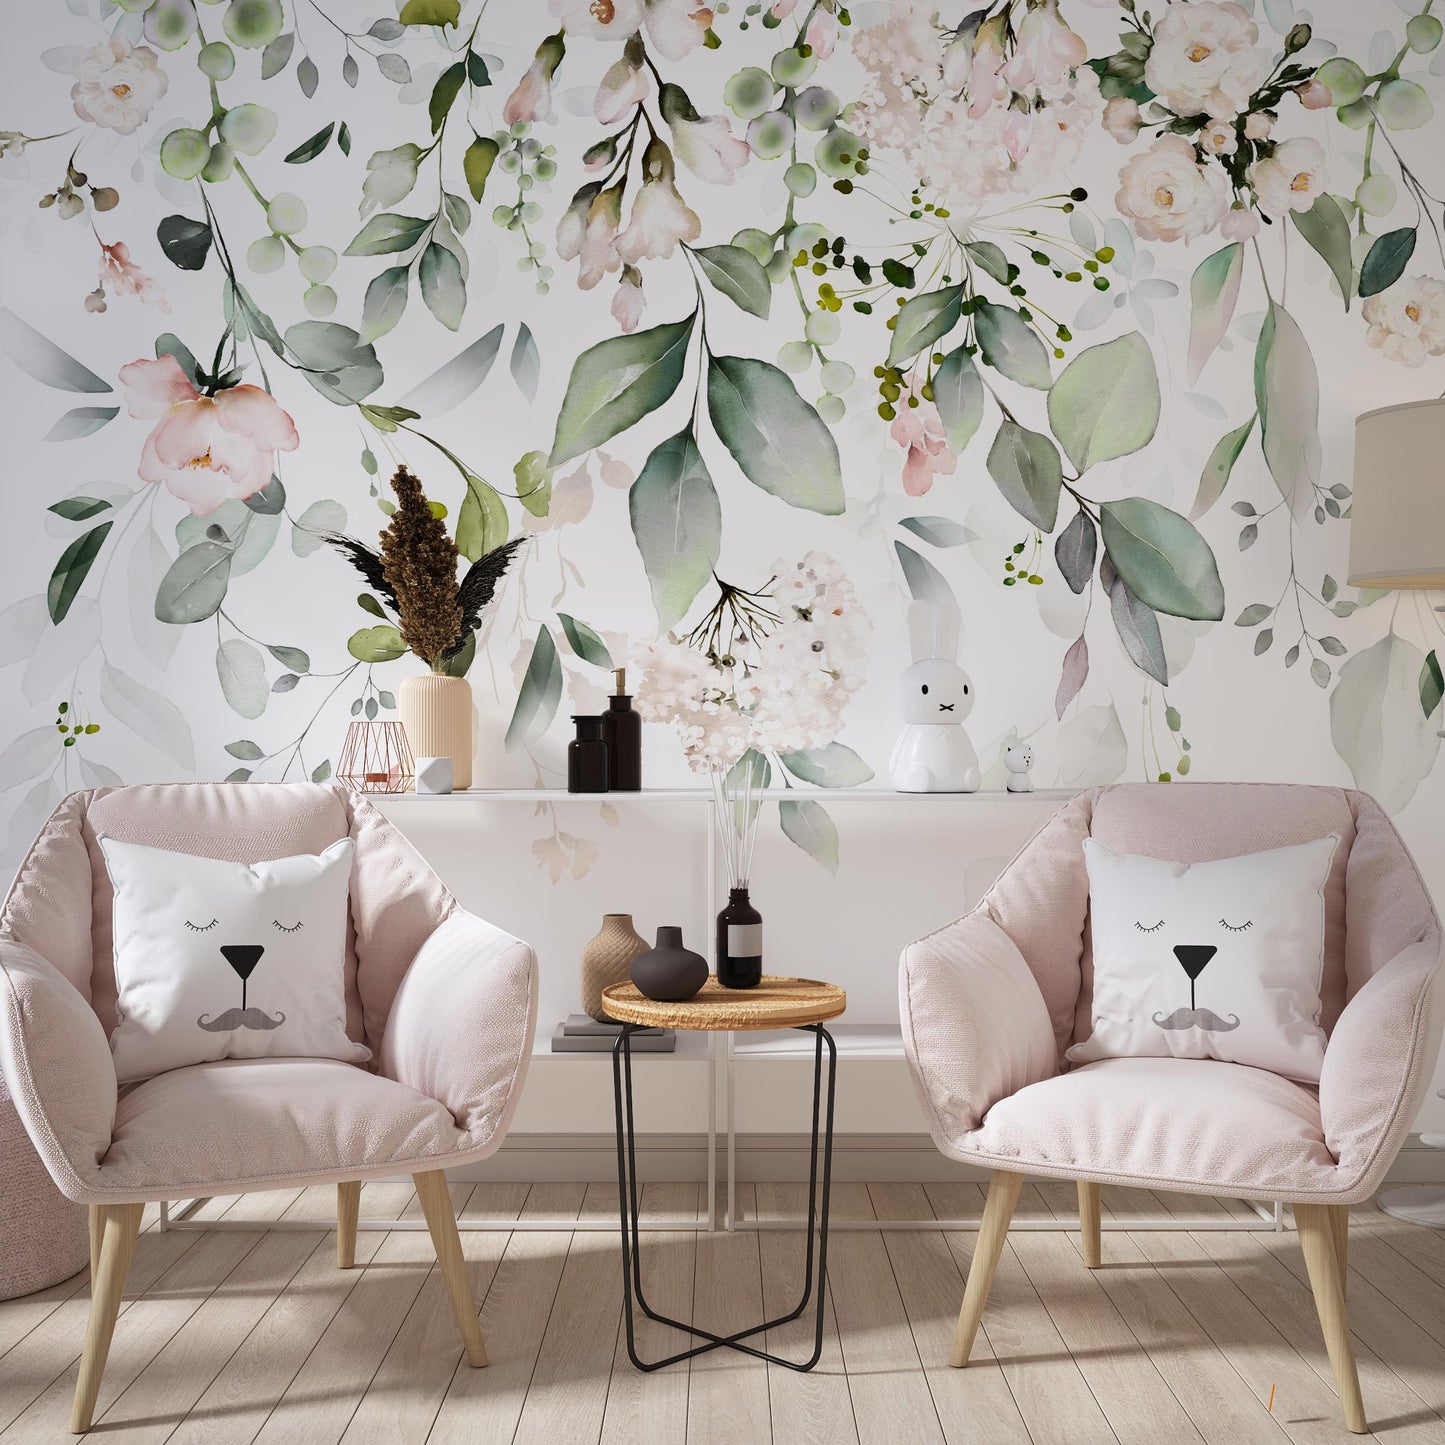 Big Girls Bedroom with Sitting/Reading Area with Pink Chairs:  Watercolor botanical wallpaper with pink floral accents harmonizes with pink chairs in big girls' bedroom.